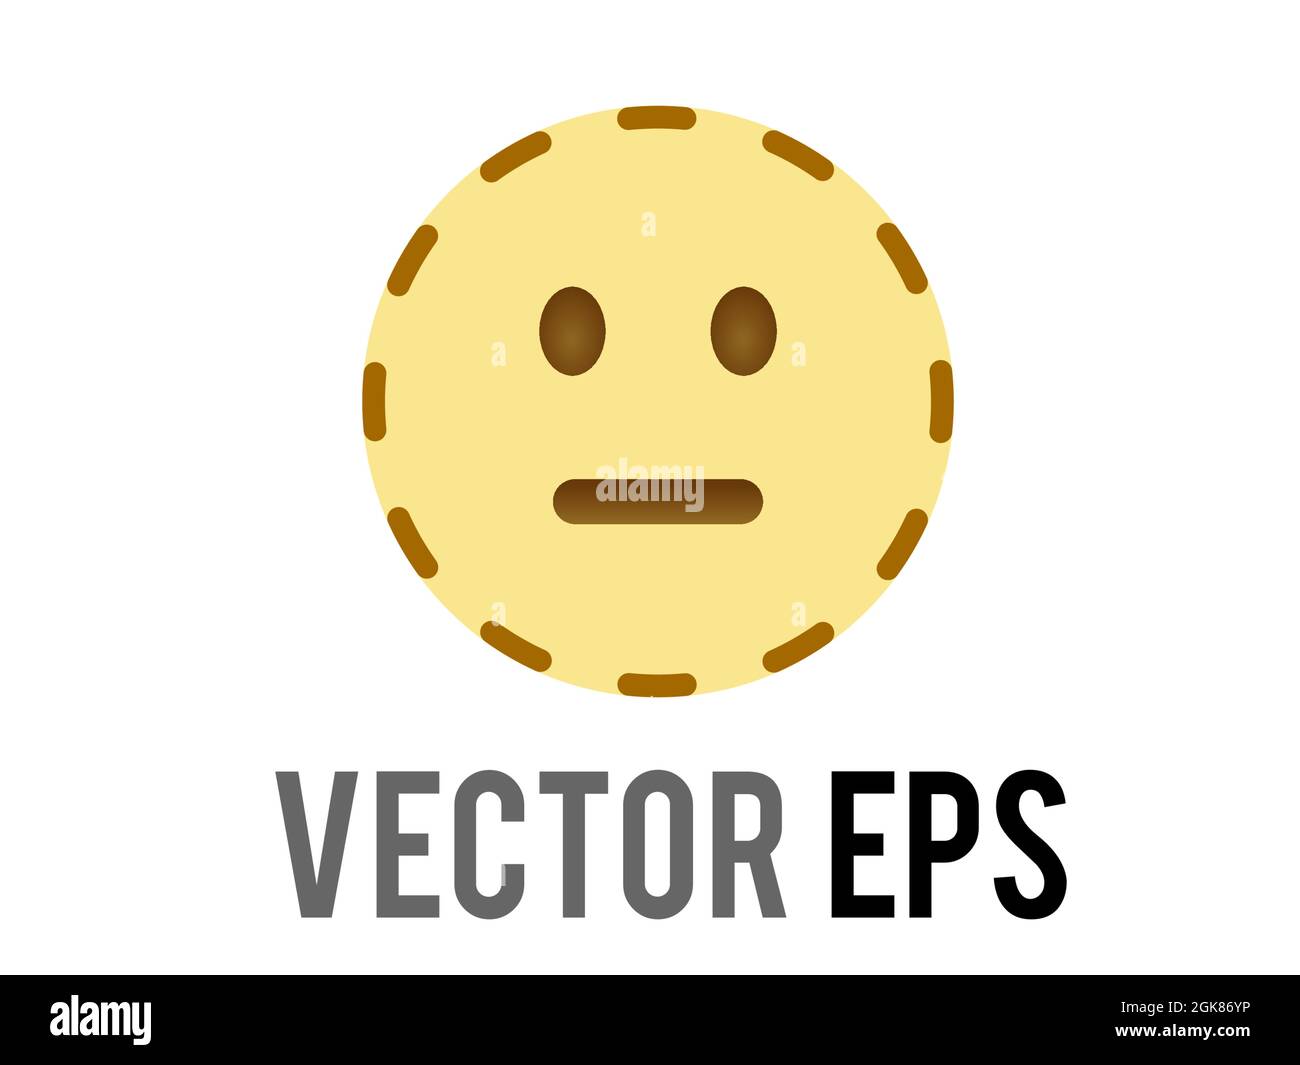 The vector muted yellow neutral helpless, disappointed, upset face icon with dotted or dashed outline, represent someone that is invisible or hidden Stock Vector